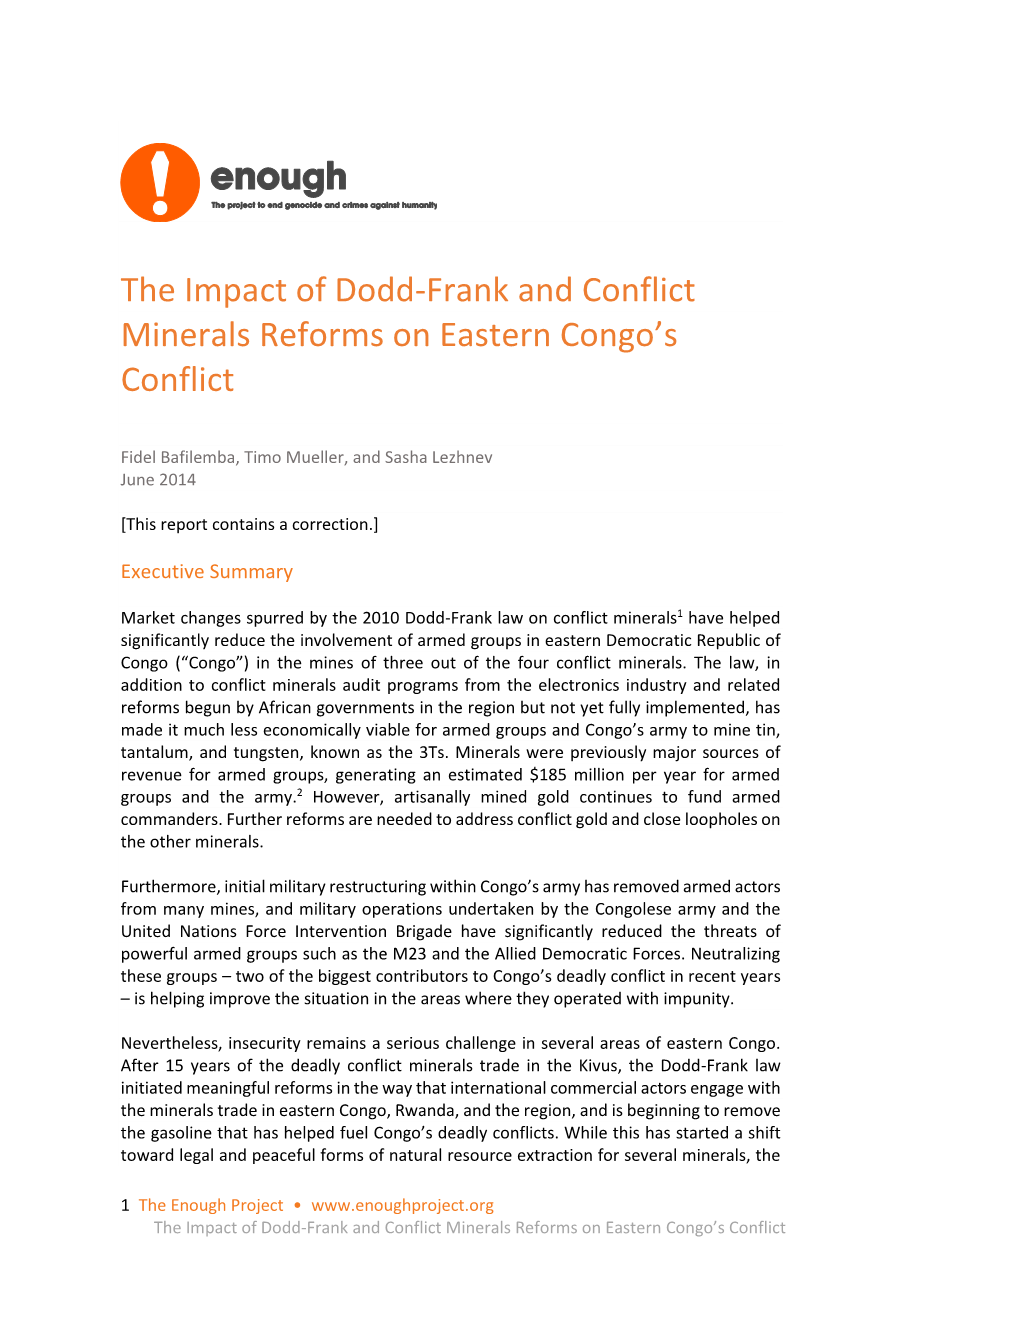 The Impact of Dodd-Frank and Conflict Minerals Reforms on Eastern Congo’S Conflict